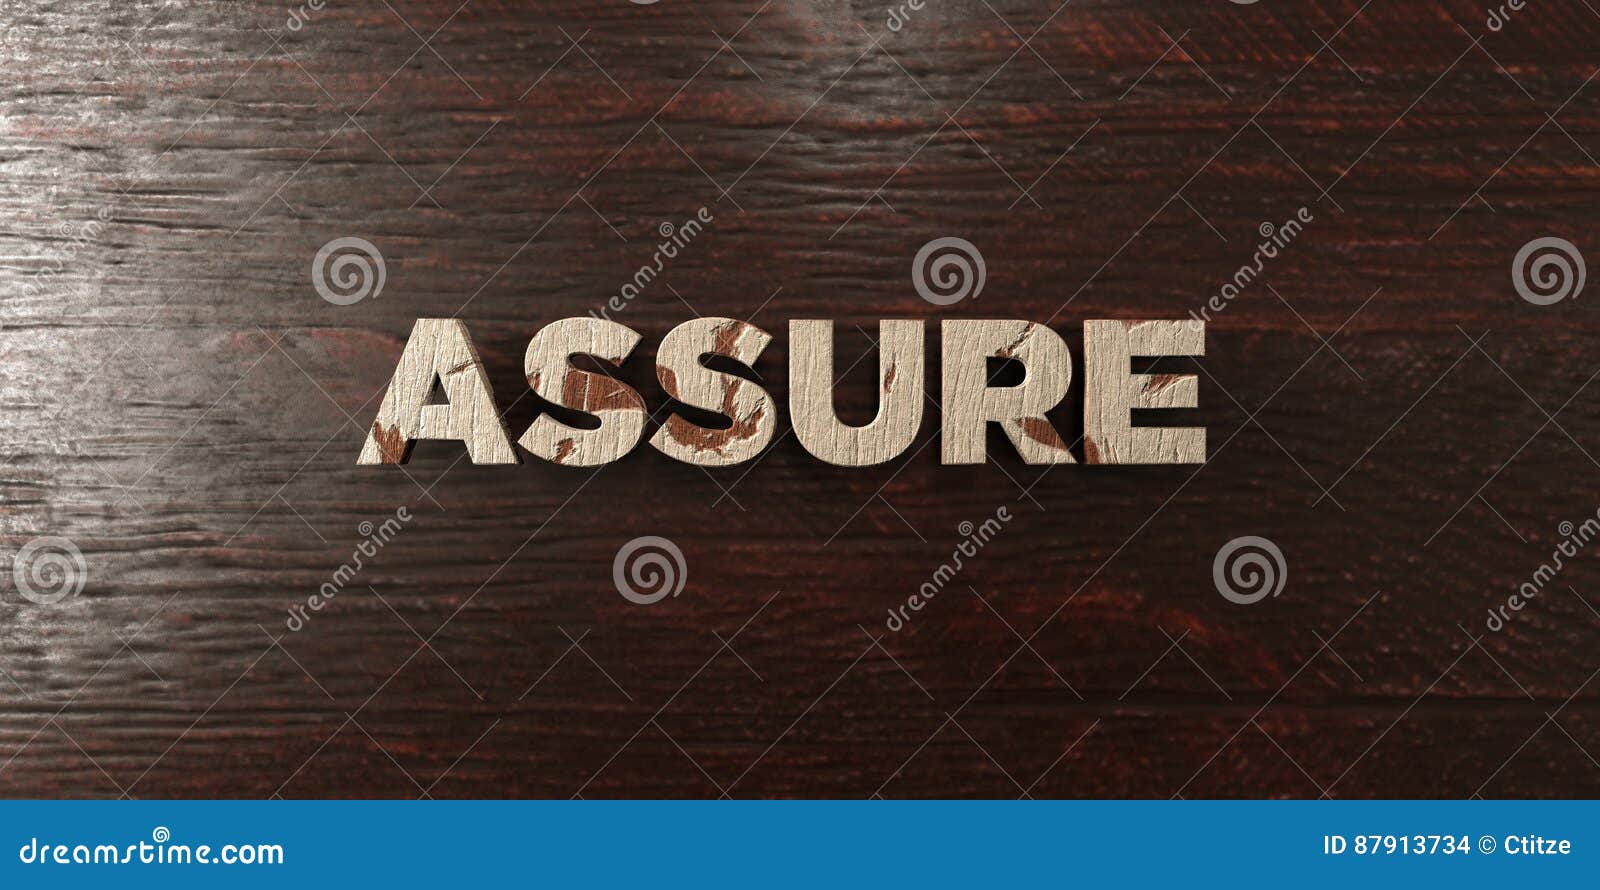 assure - grungy wooden headline on maple - 3d rendered royalty free stock image